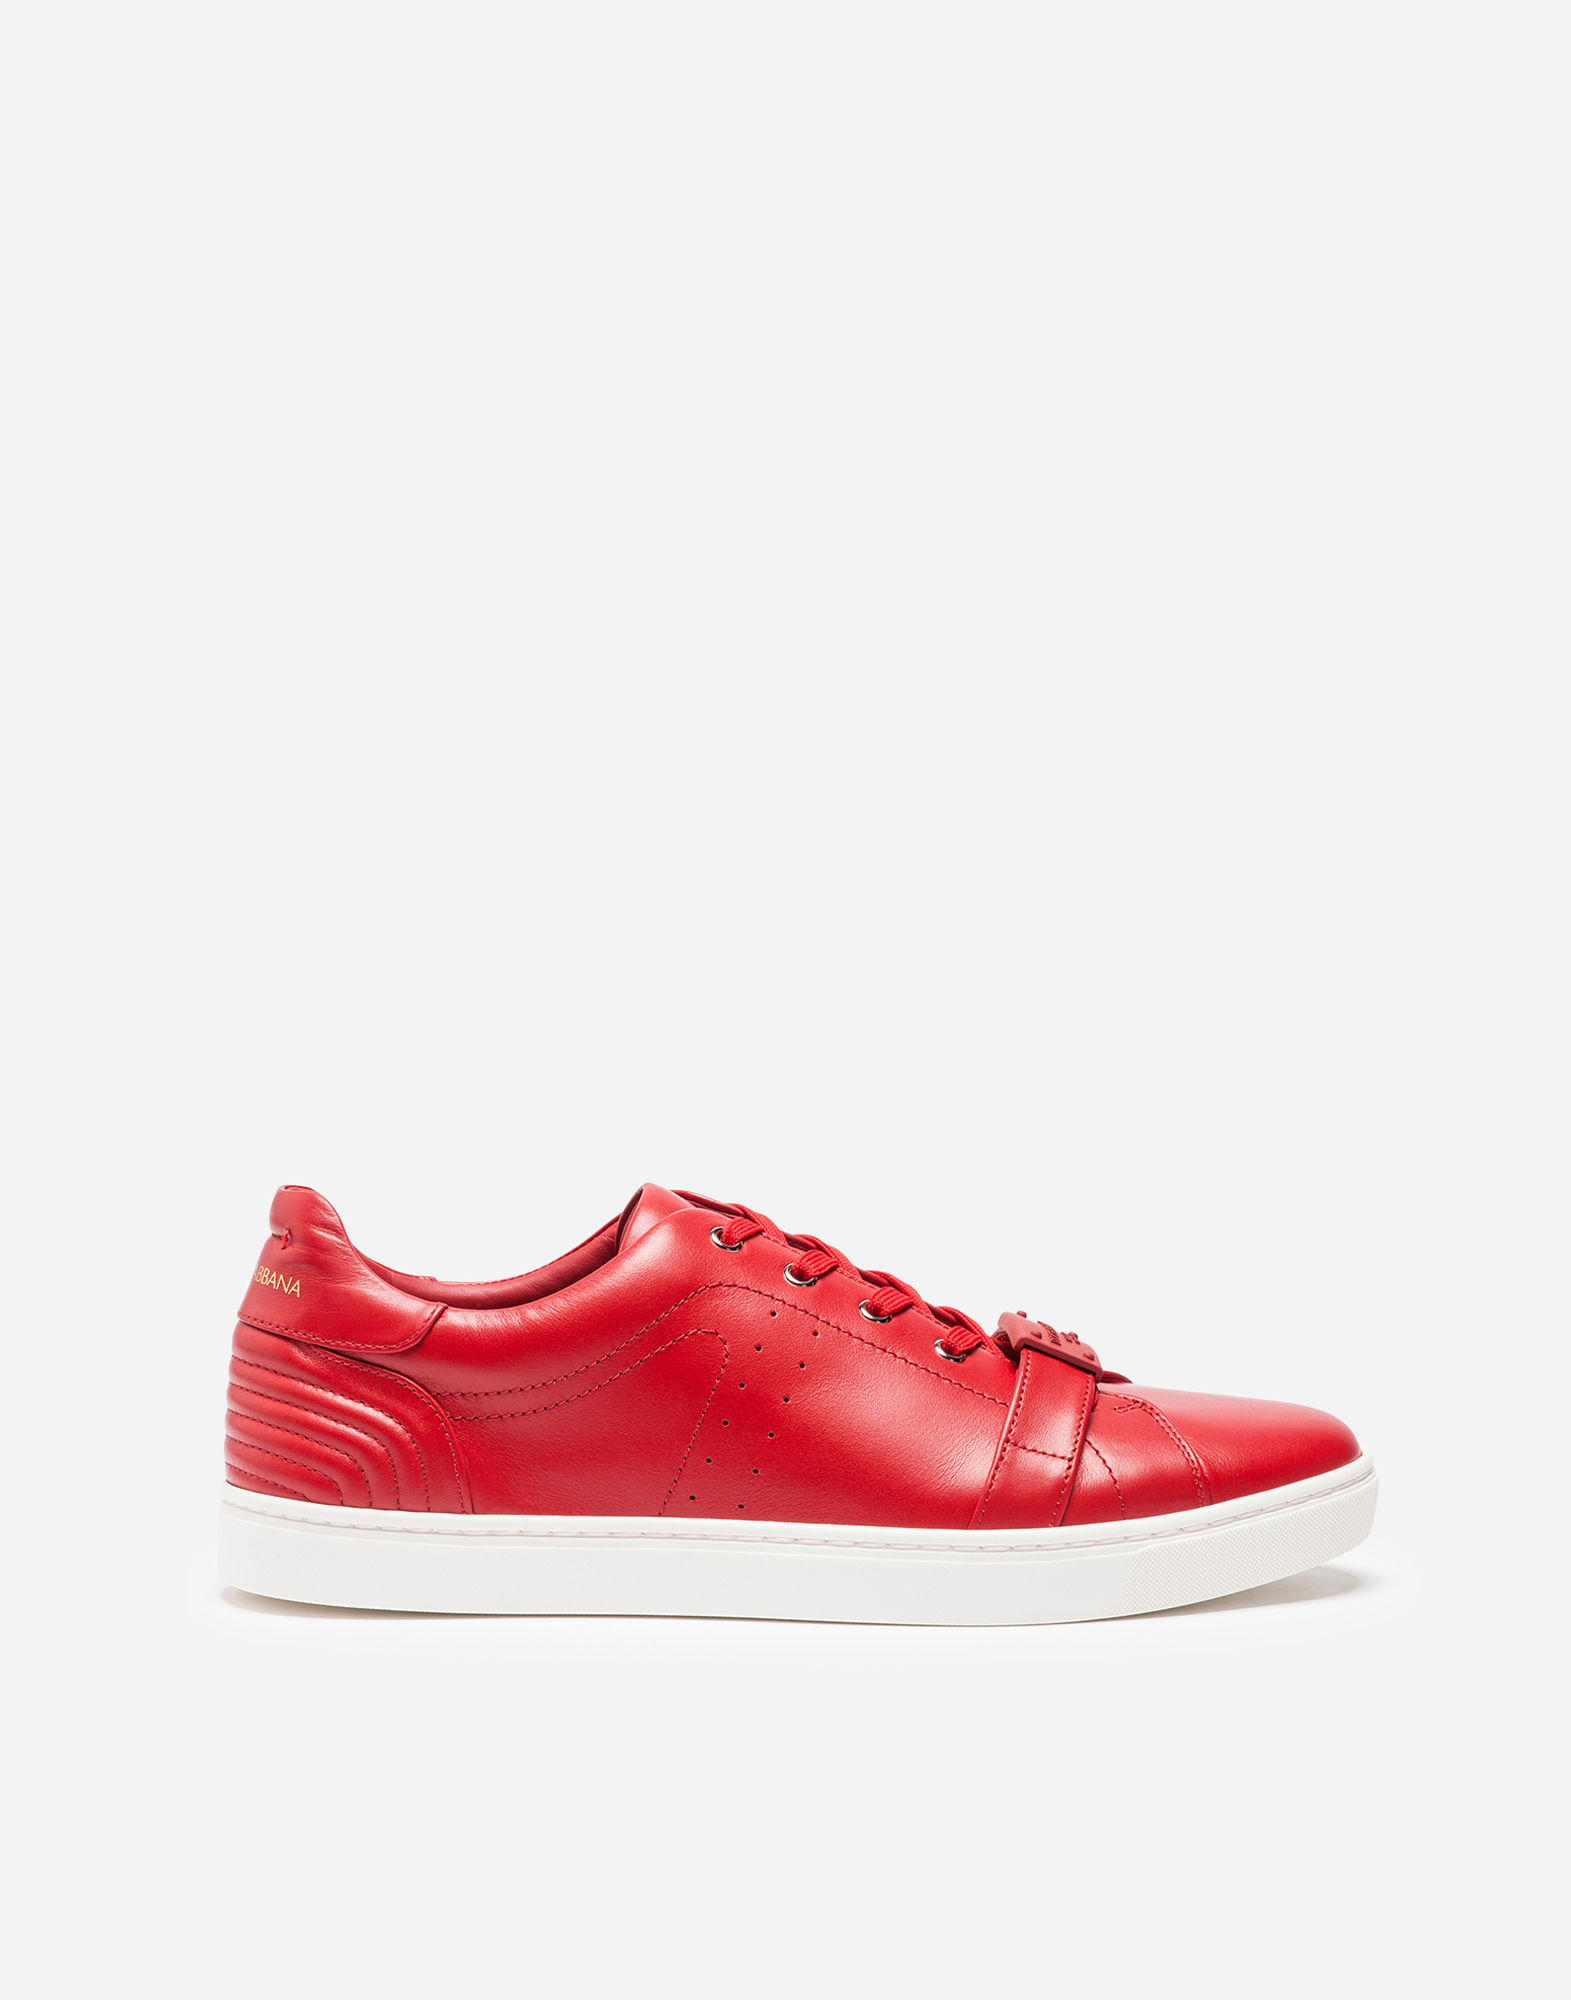 DOLCE & GABBANA London Sneakers In Leather in 红 | ModeSens